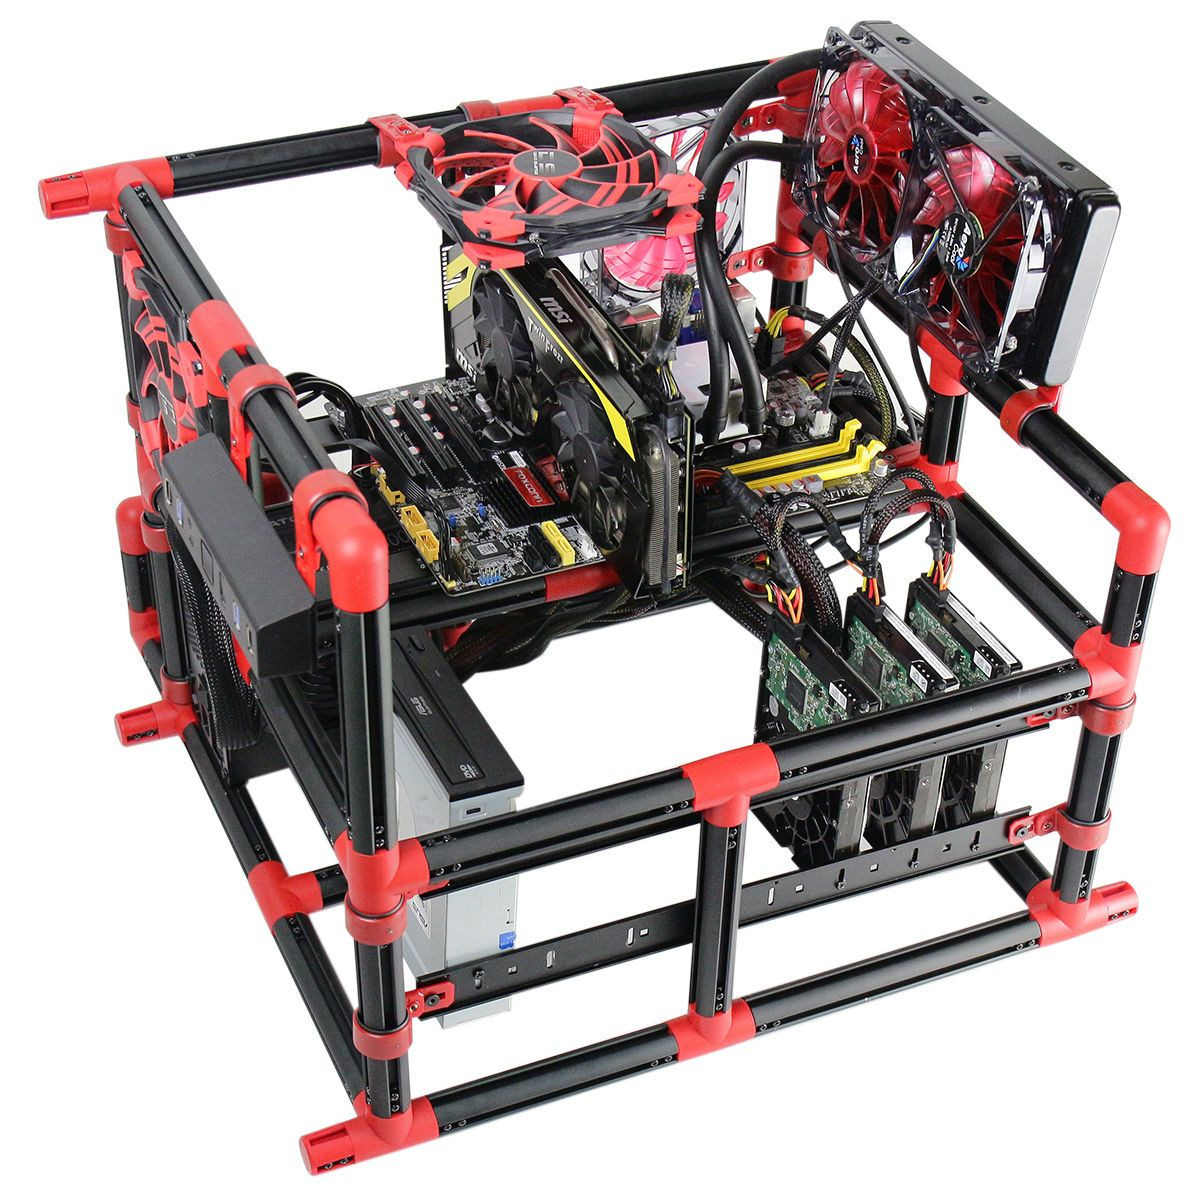 Best ideas about DIY Pc Kits
. Save or Pin Aerocool Dream Box Creative DIY PC puter Case Building Now.